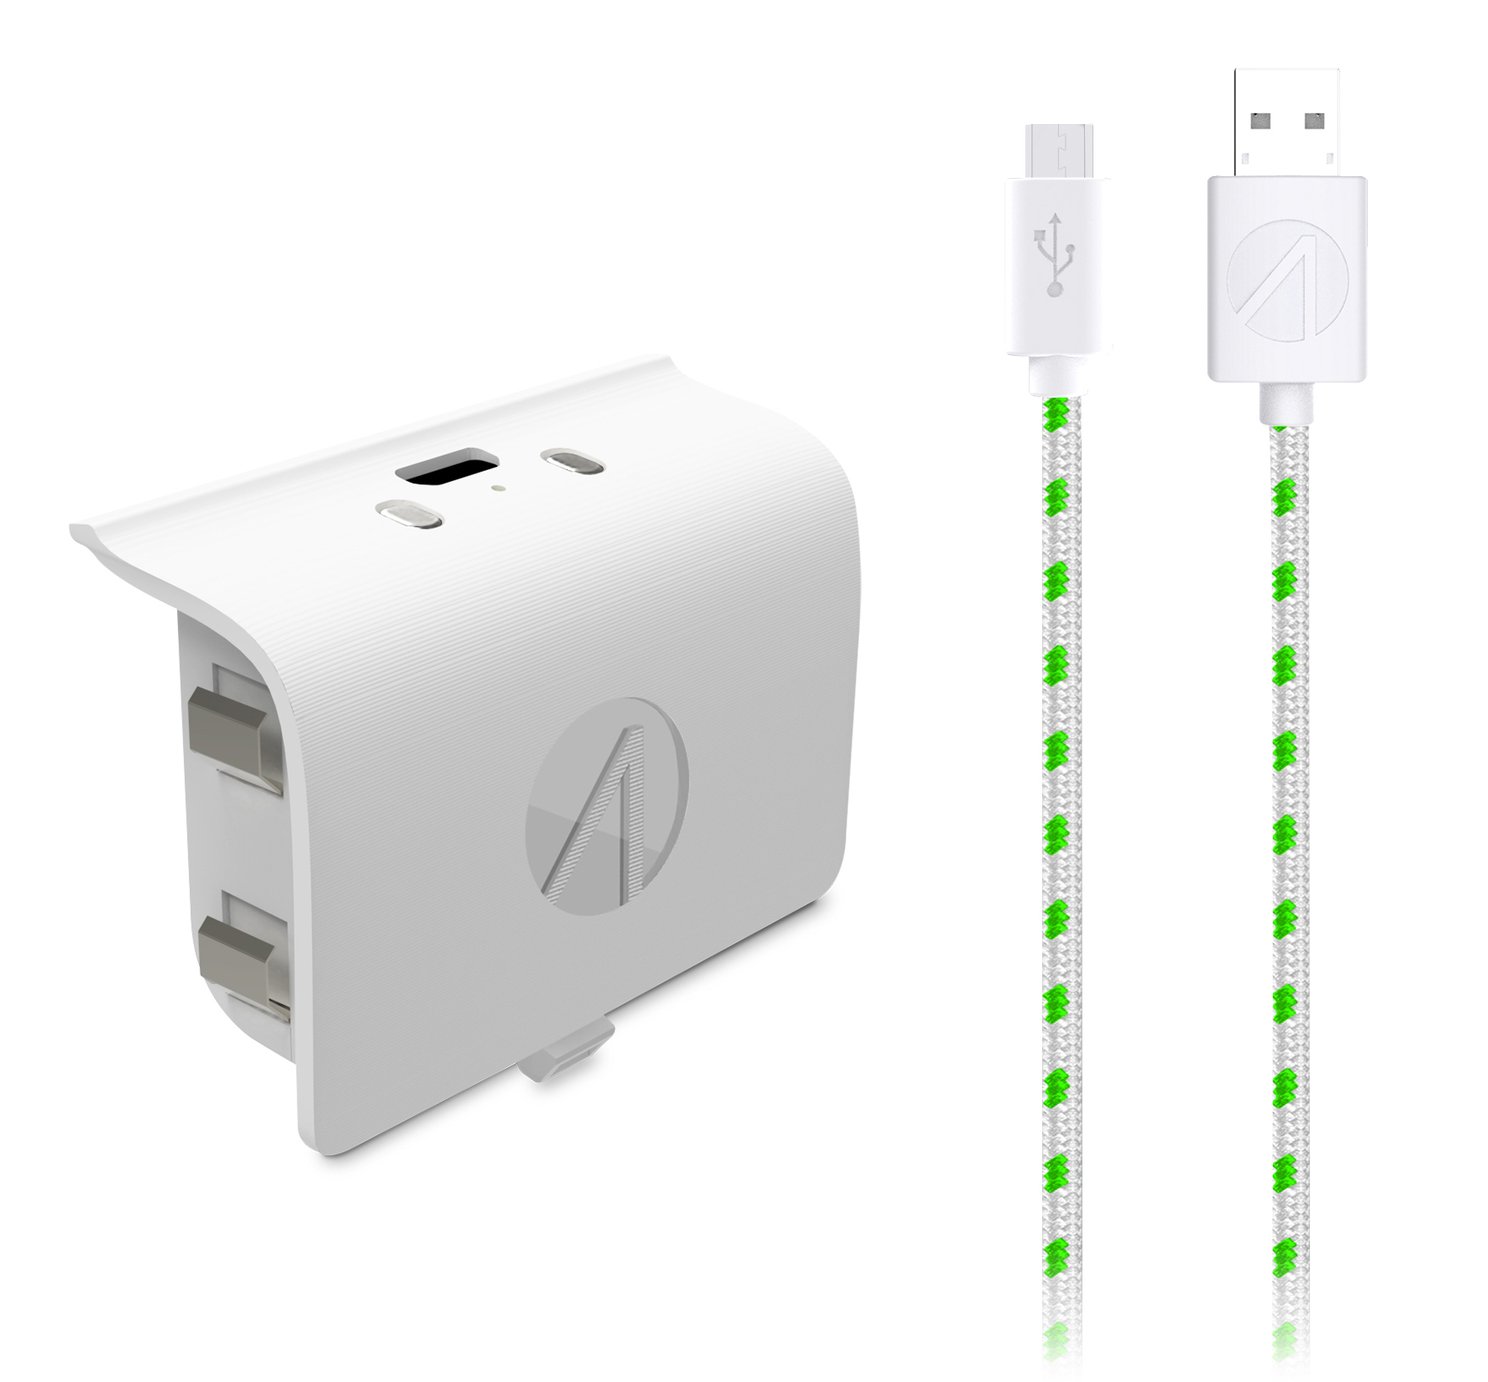 Stealth Xbox One Single Rechargeable Battery - White